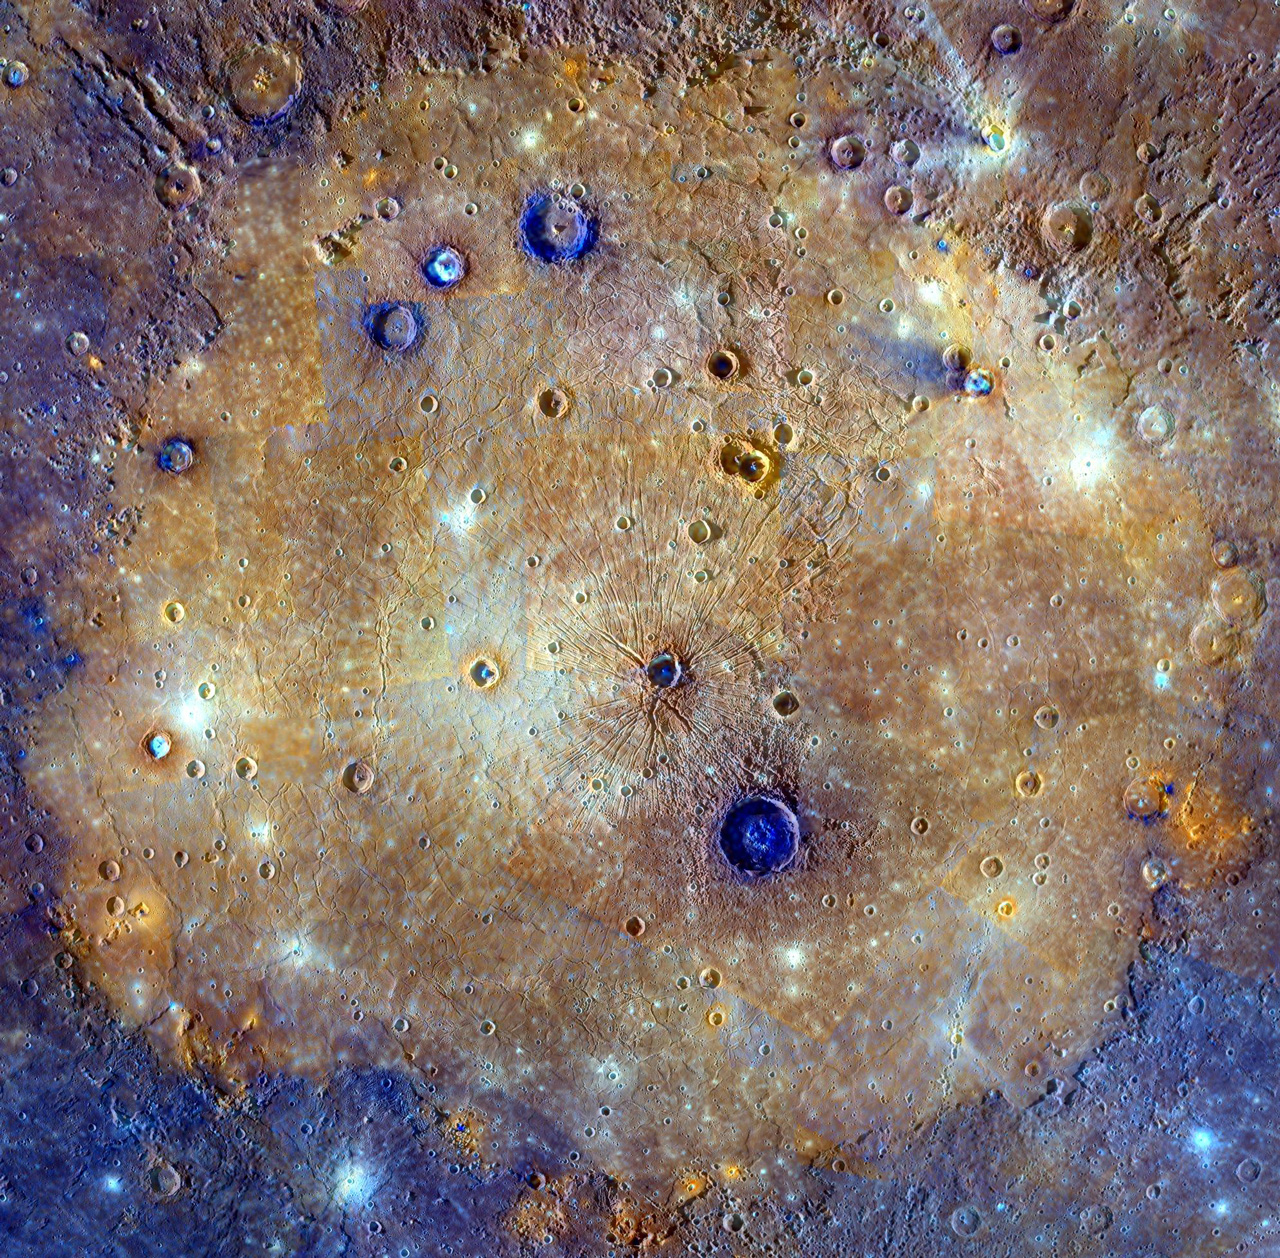 Color-enhanced view of giant crater from above.